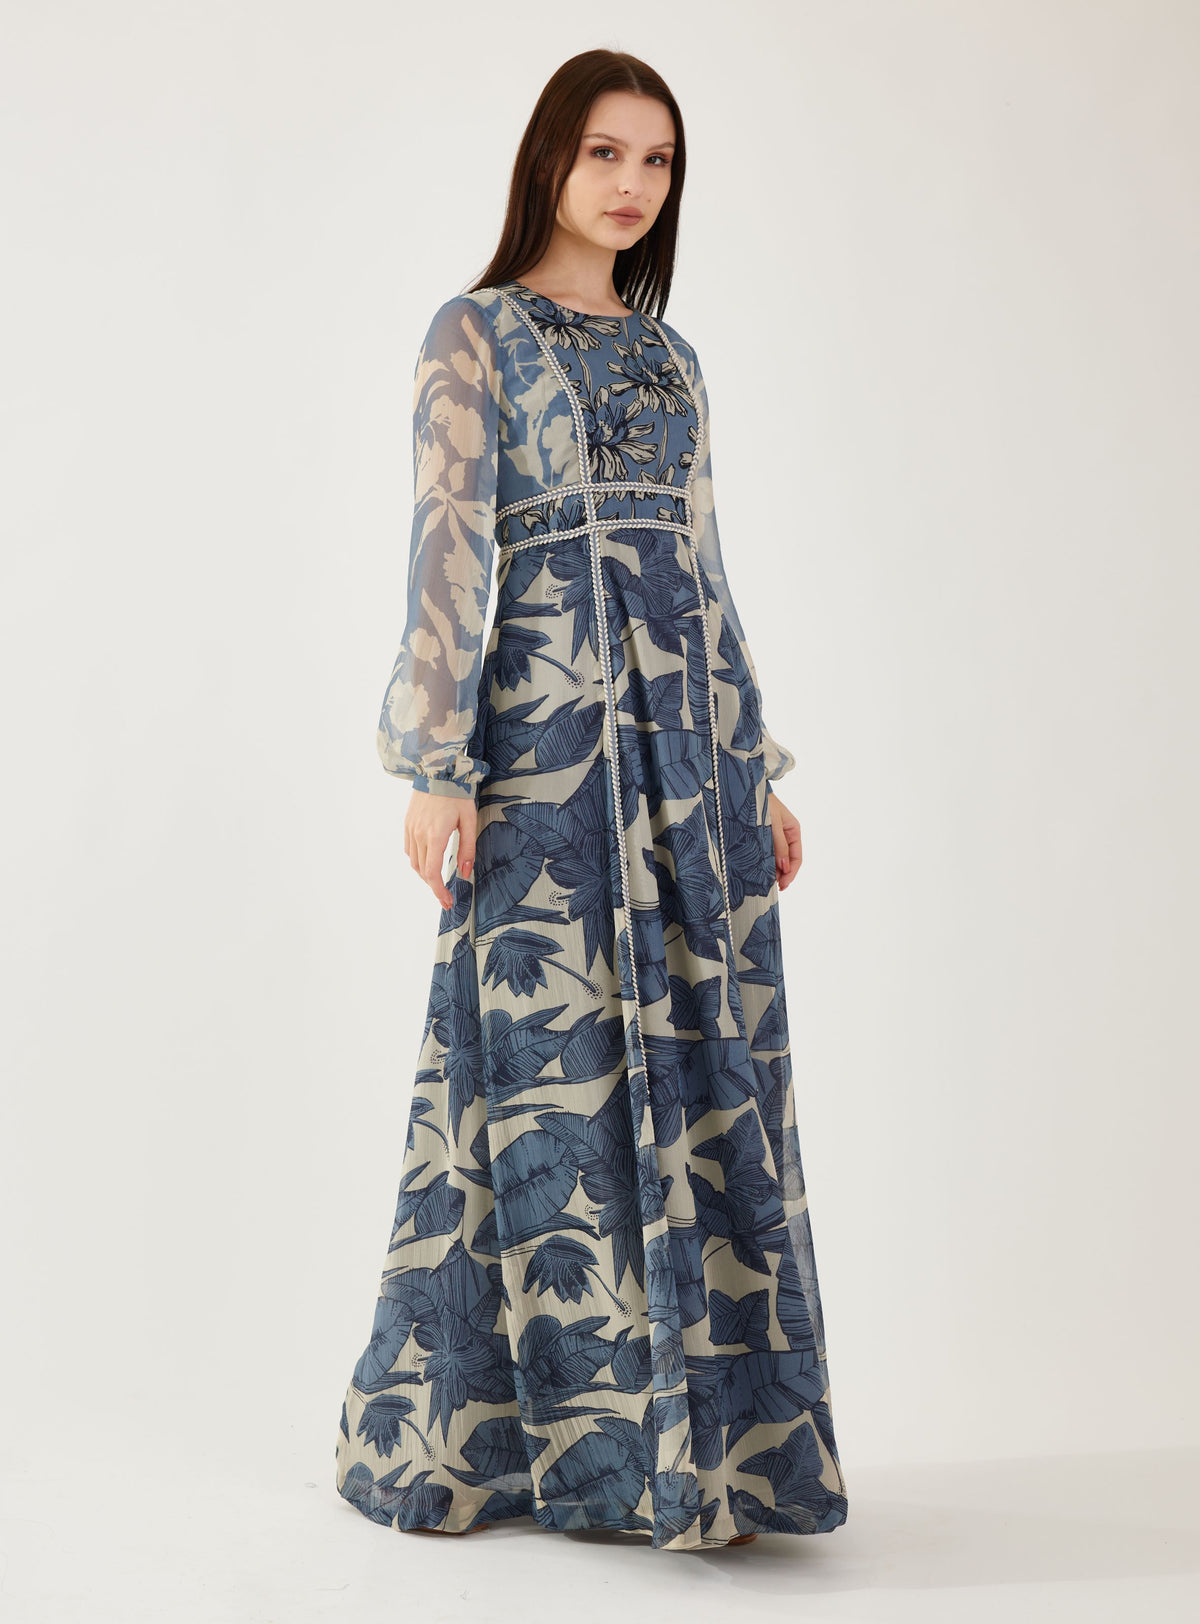 BLUE AND CREAM FLORAL EMBROIDERED KAFTAN DRESS